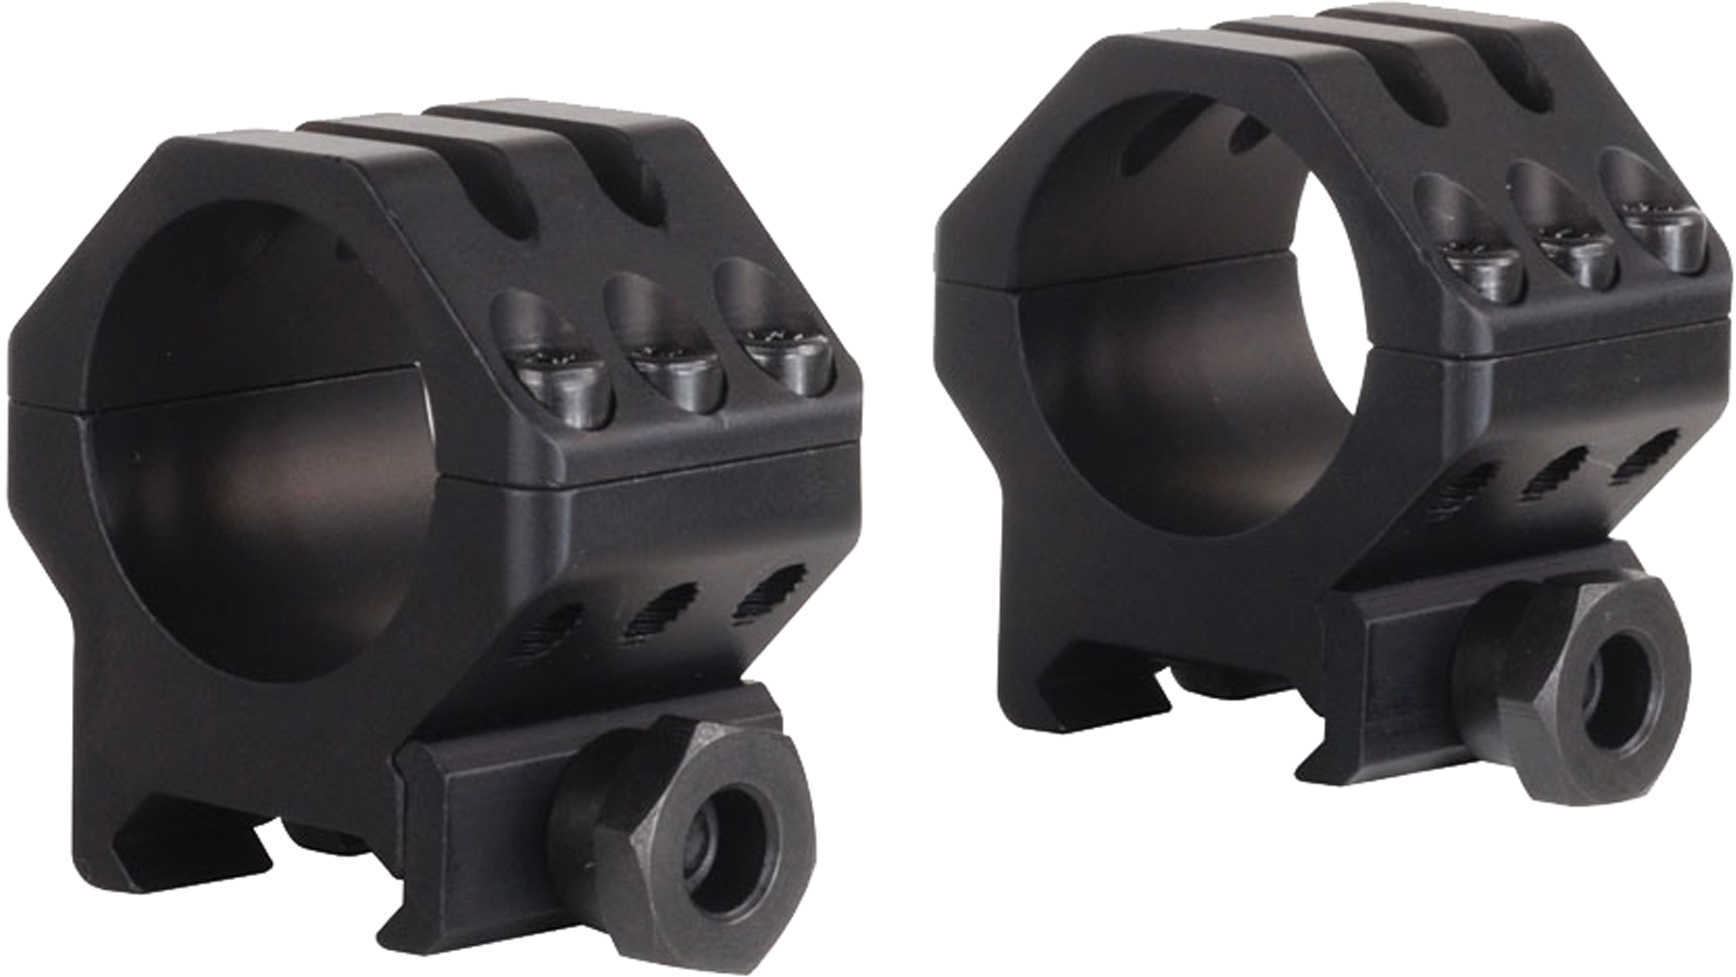 Weaver Tactical 6-Hole Picatinny Rings X-High 1" - Features the same six screws for maximum security and cl 99690